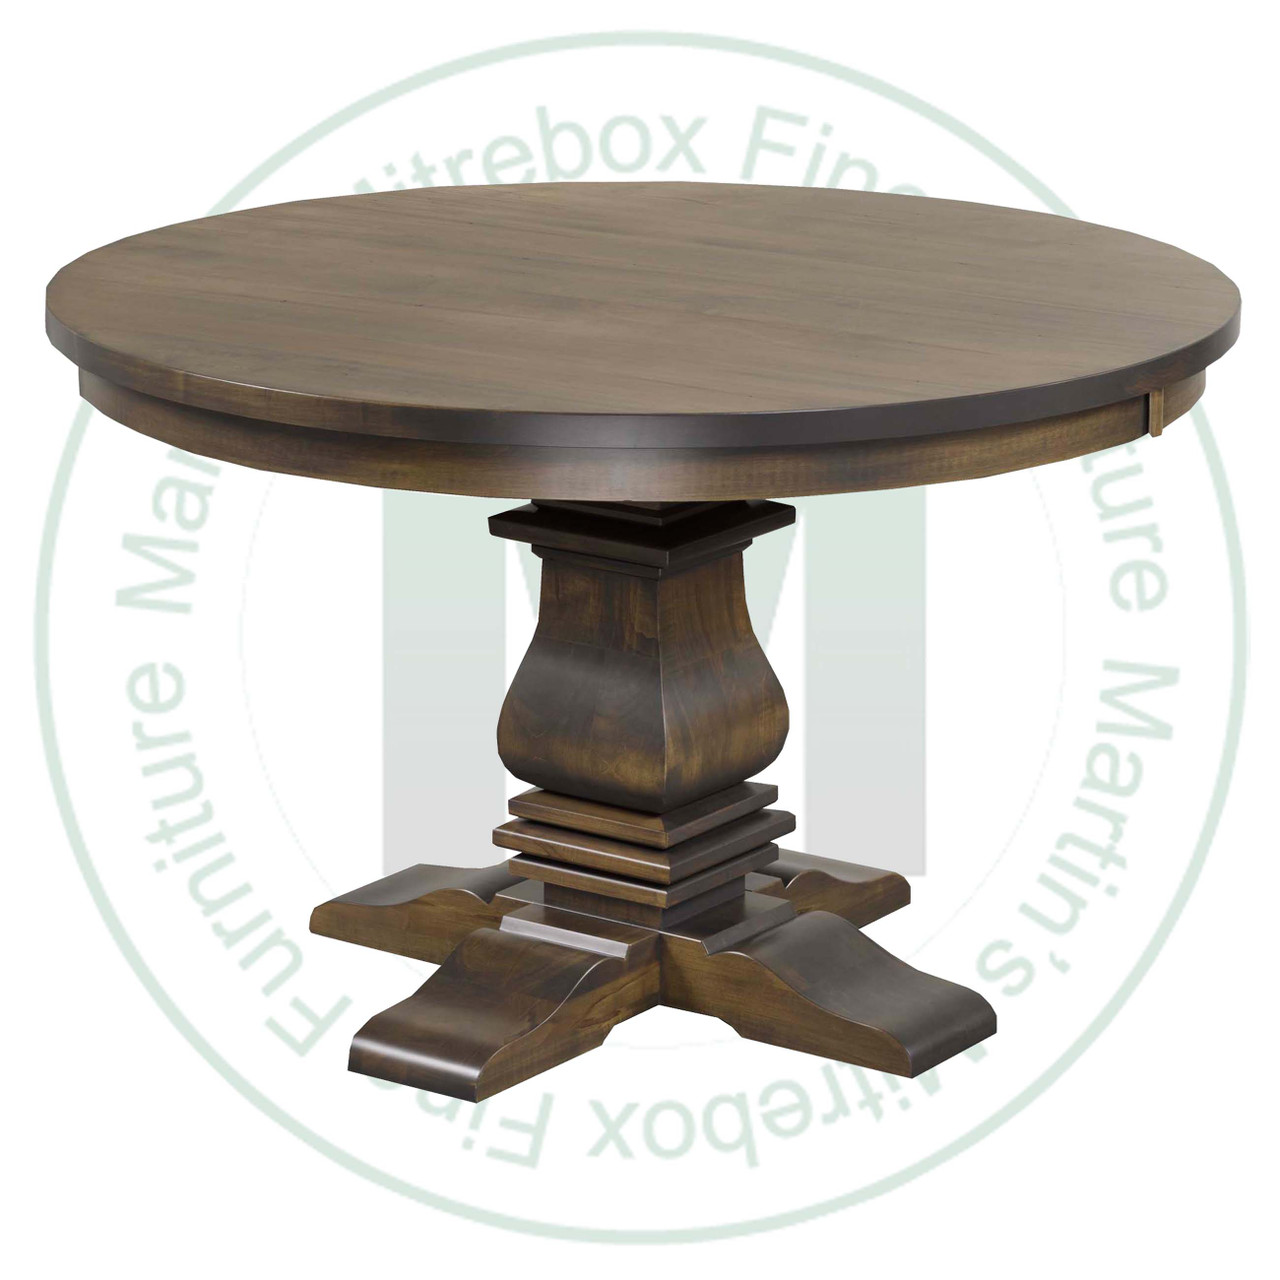 Maple Spartan Collection Single Pedestal Table 36''D x 48''W x 30''H. Table Has 1.25'' Thick Top